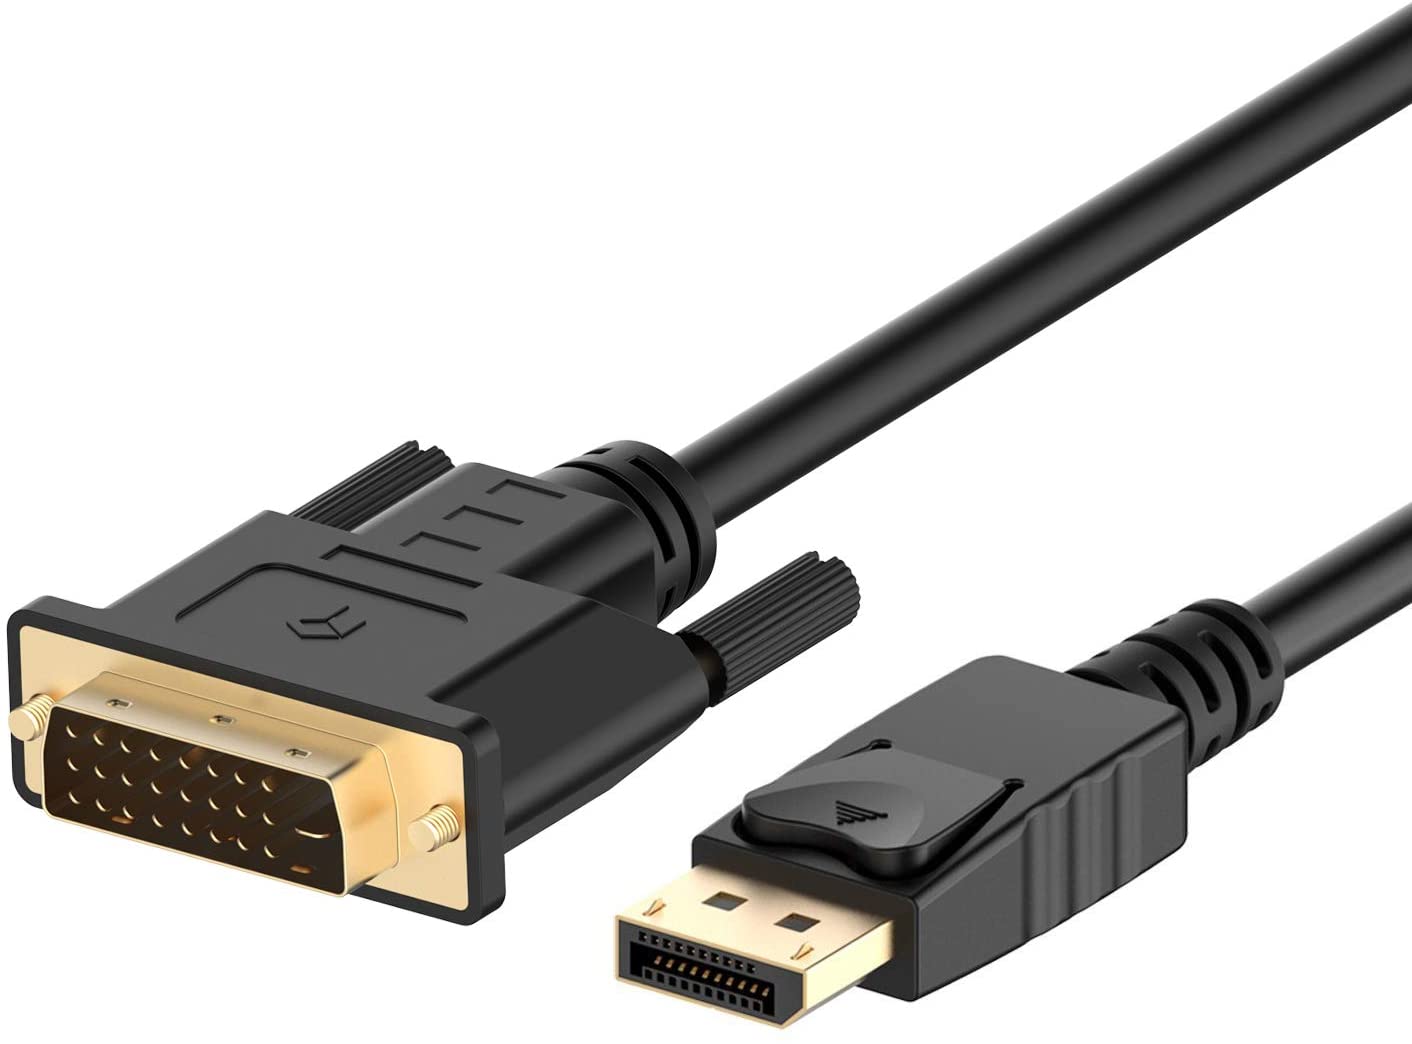 Rankie DisplayPort (DP) to DVI Cable, Gold Plated, 6 Feet